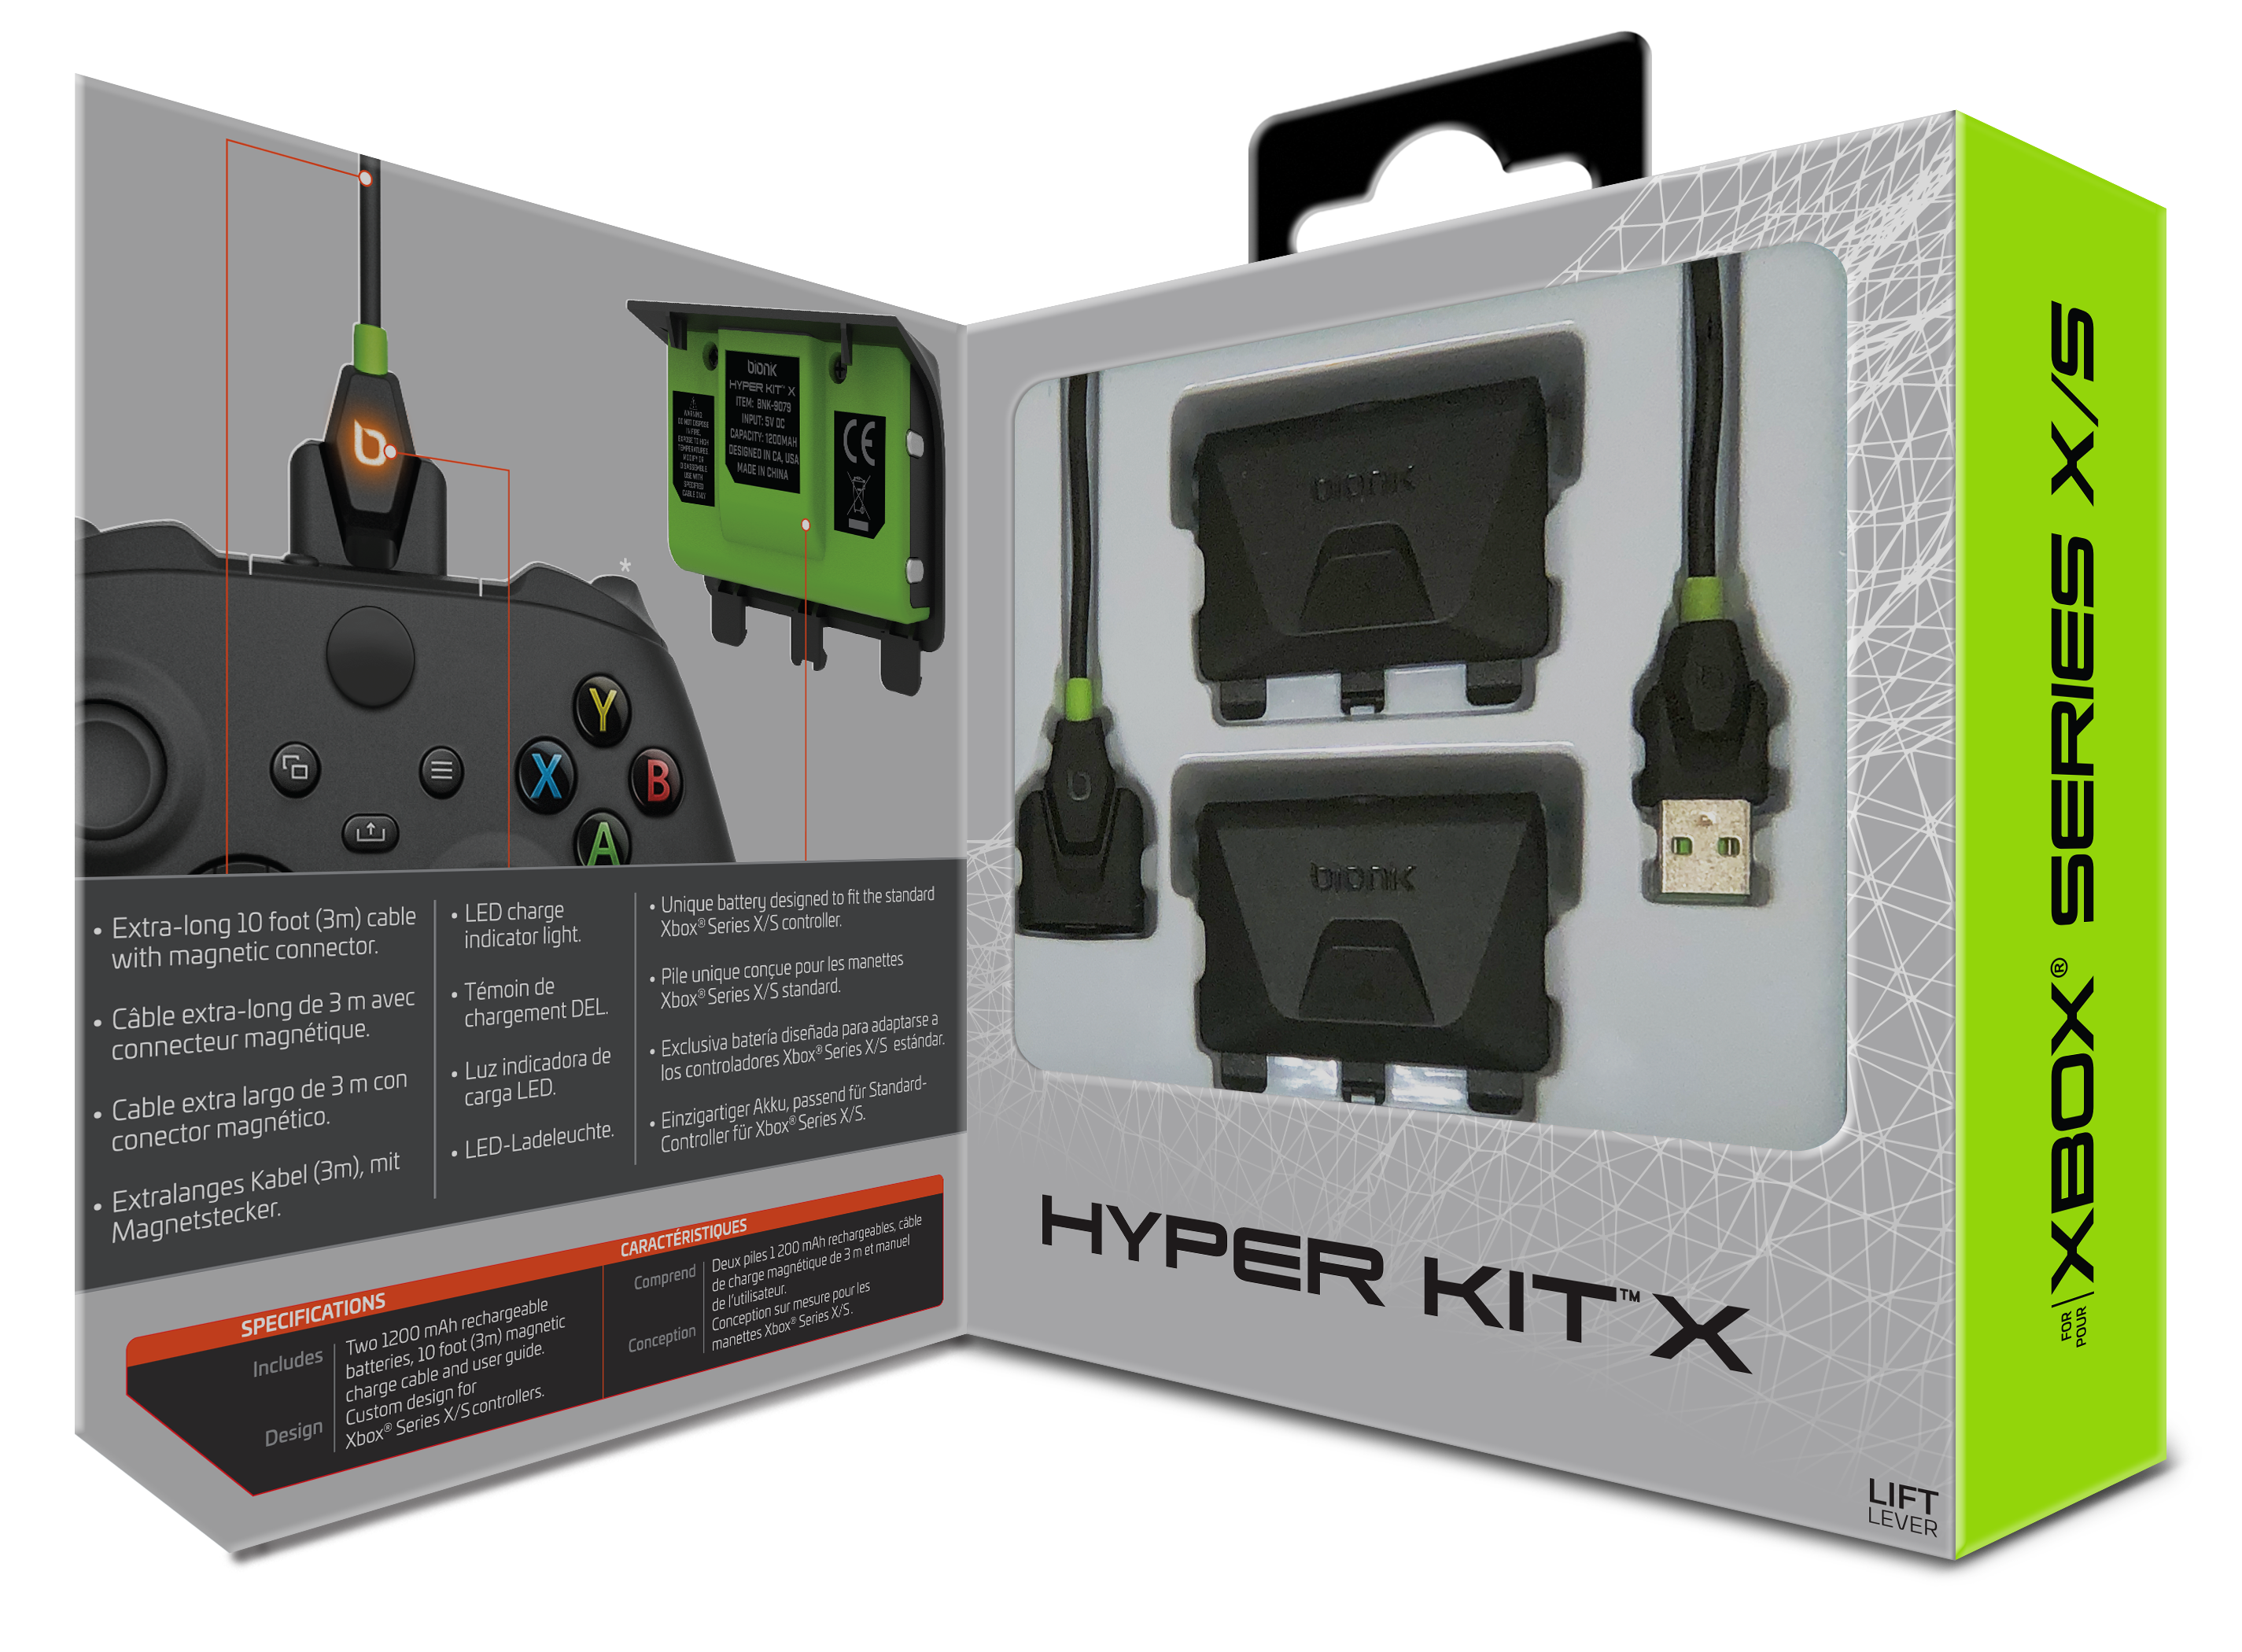 bionik Hyper Kit X Rechargeable Battery for Xbox Series X